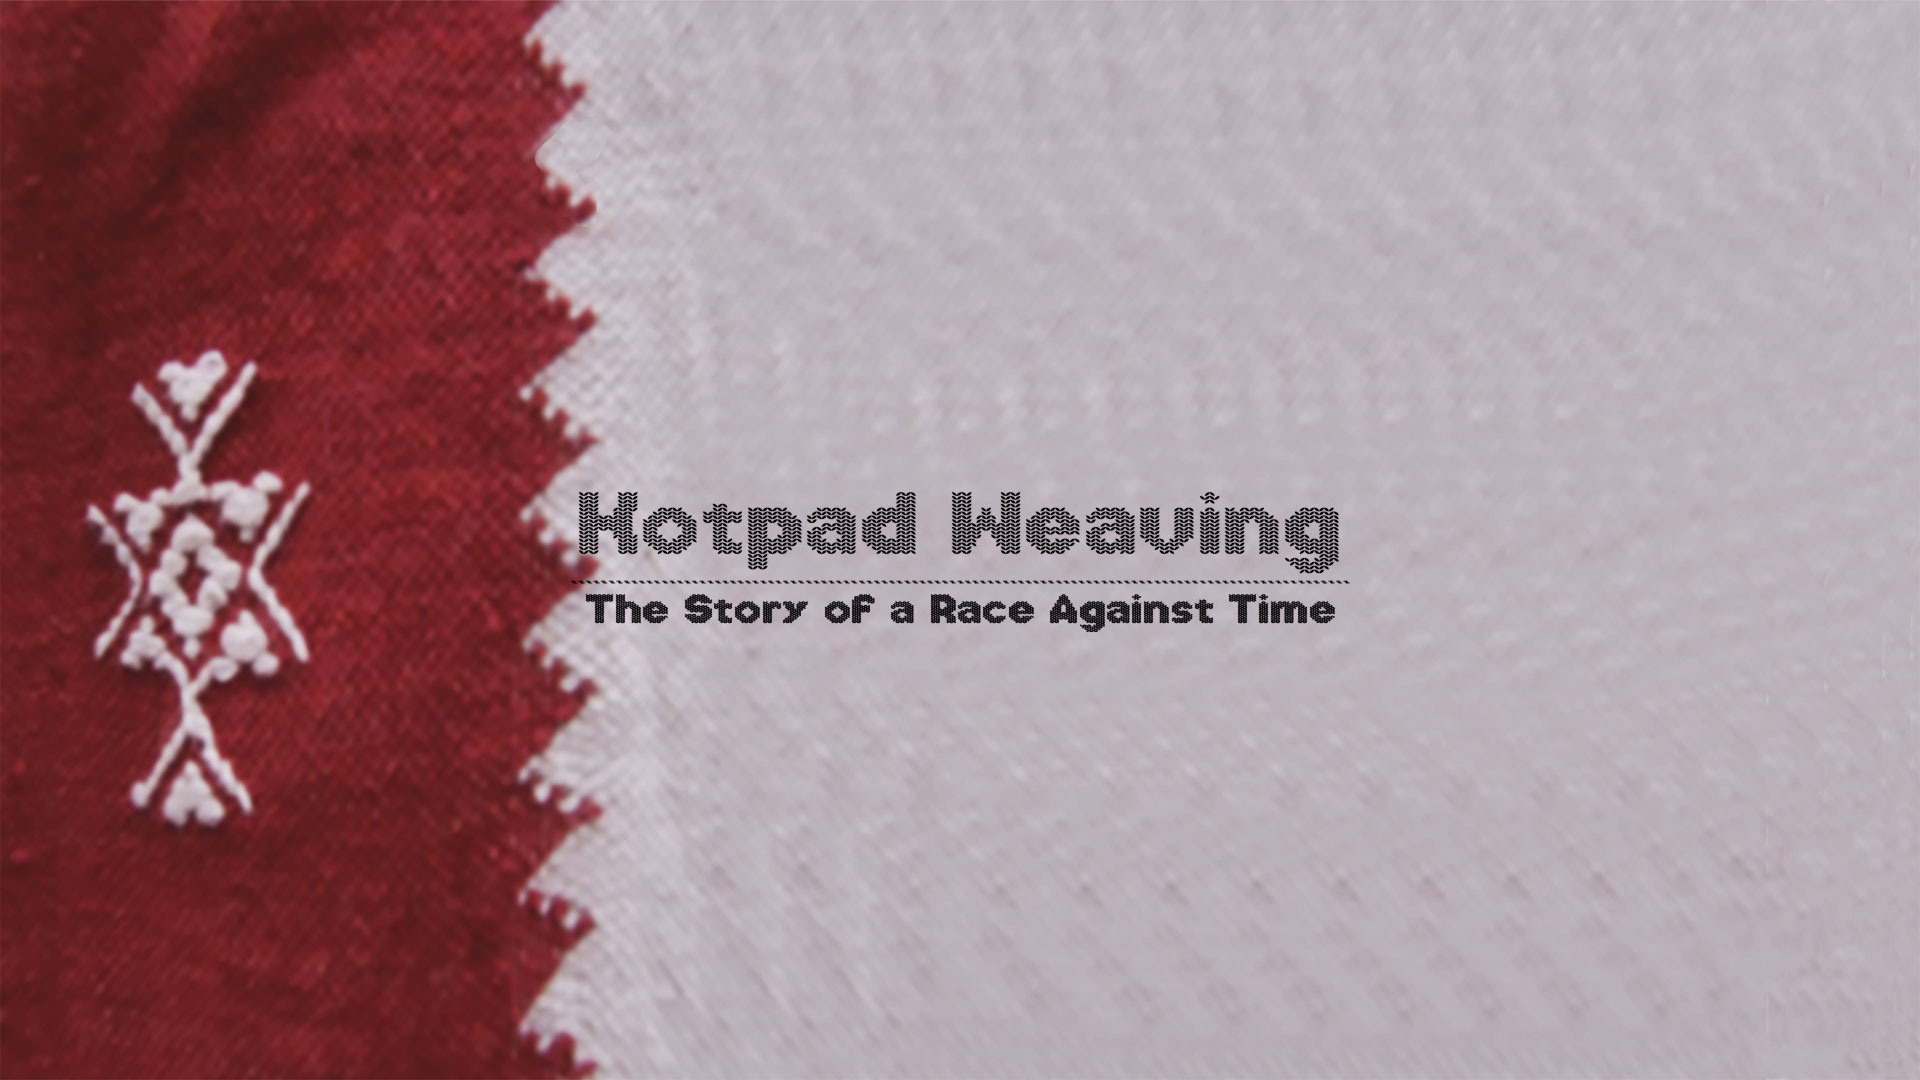 KOTPAD WEAVING: THE STORY OF A RACE AGAINST TIME